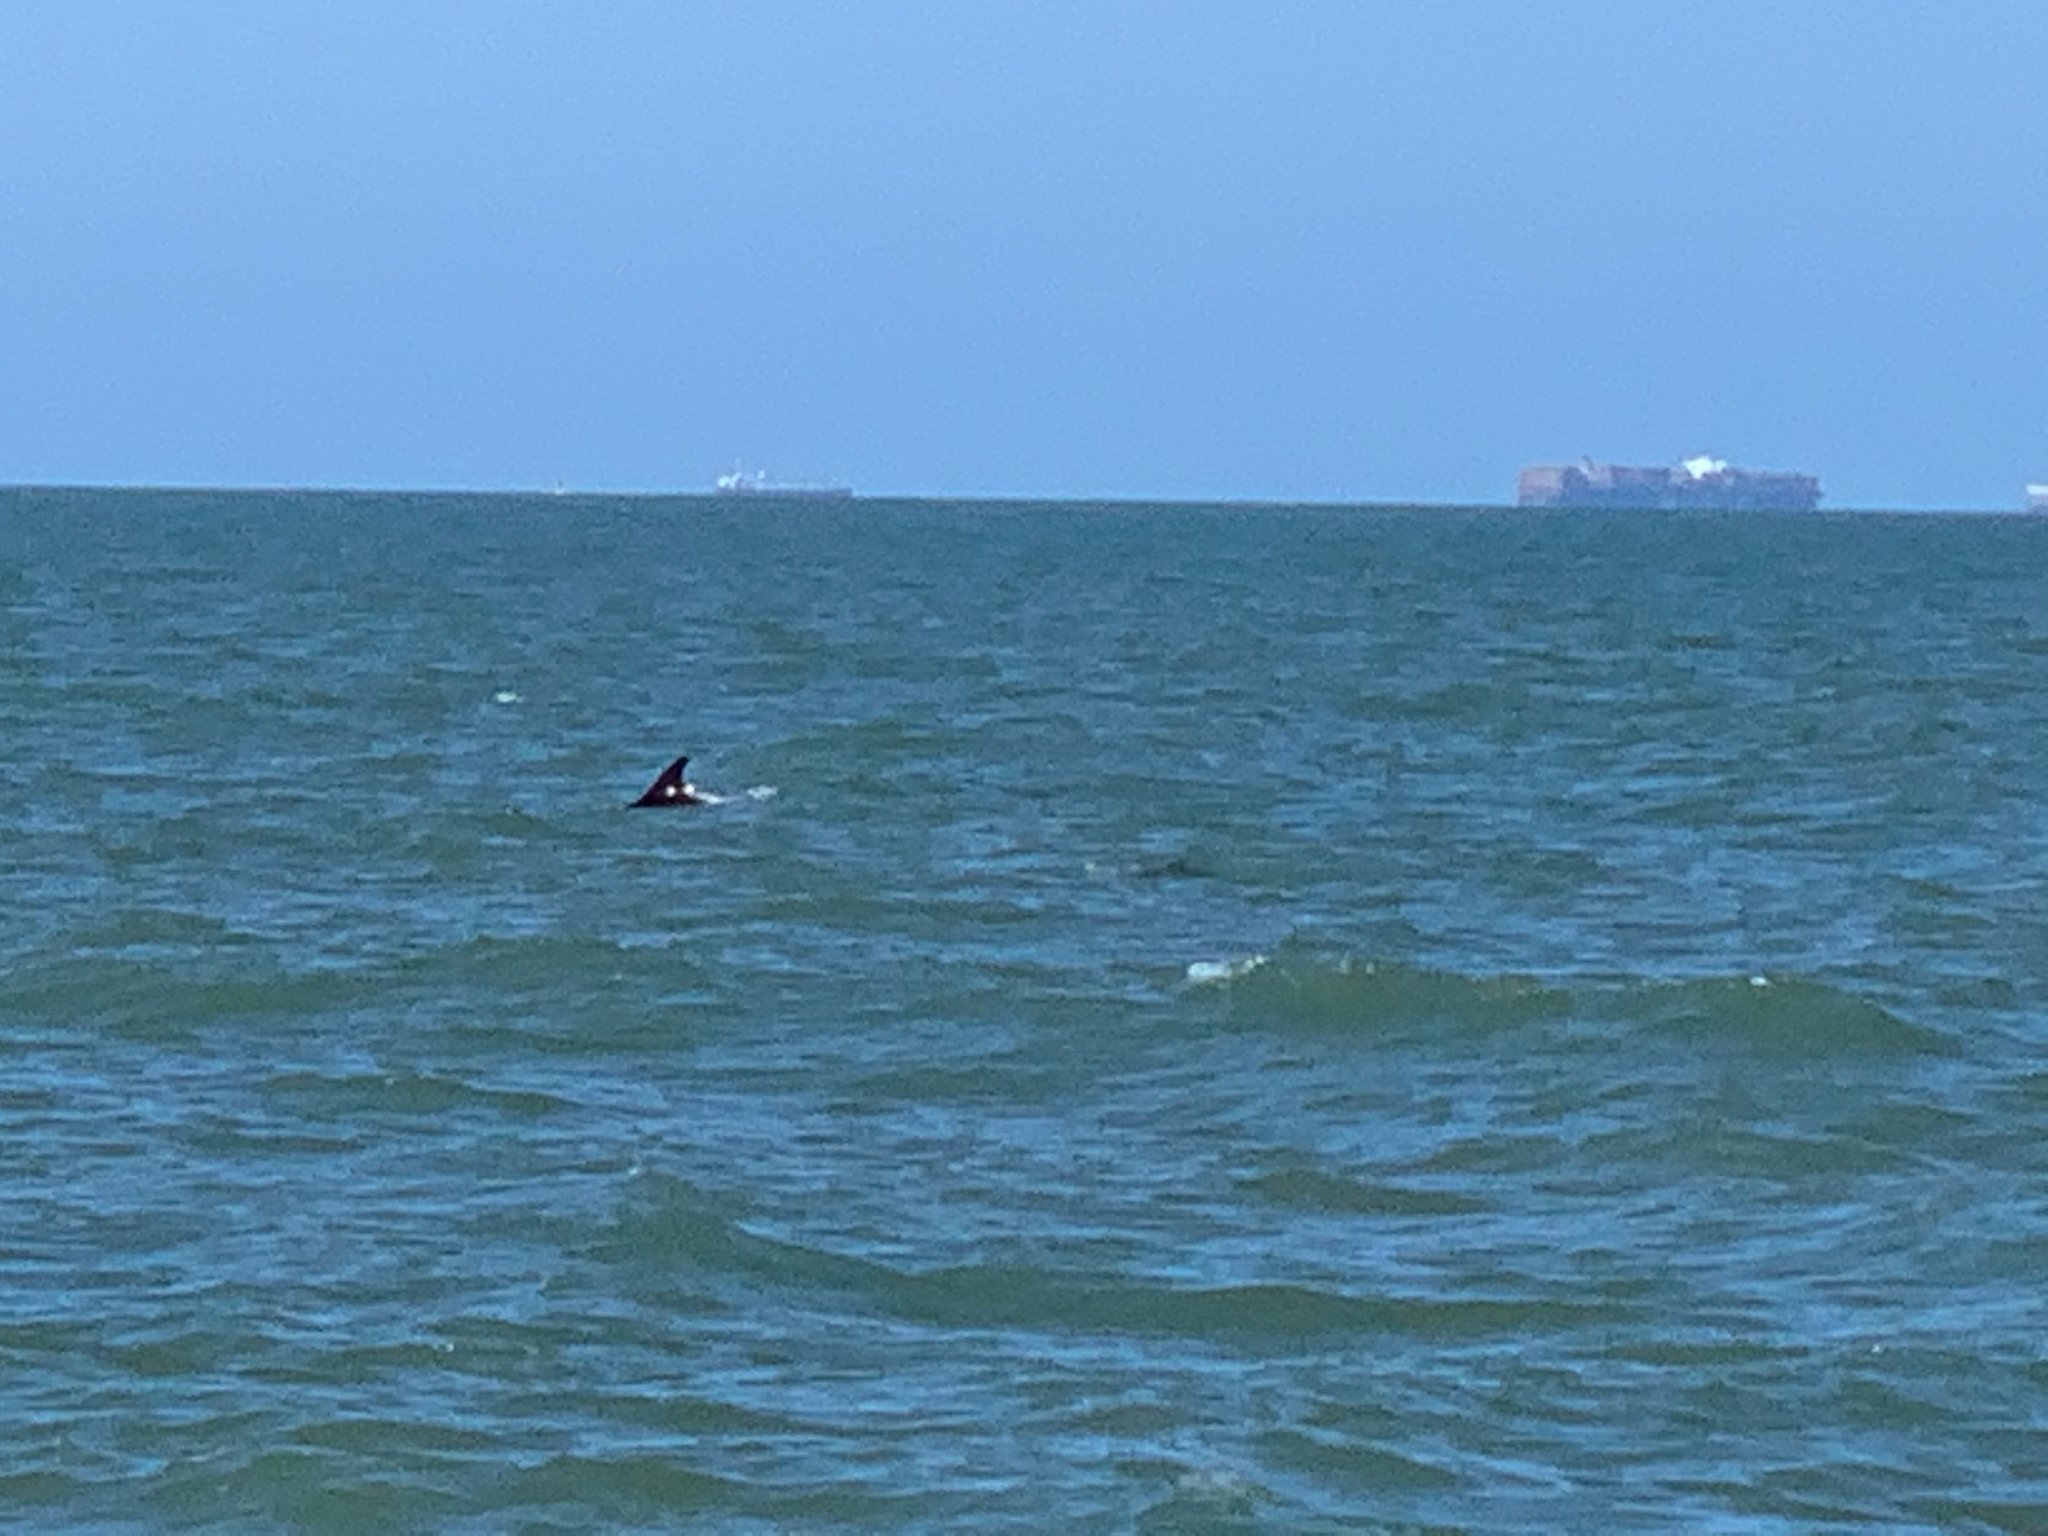 Rare white-beaked dolphins have been spotted off the Essex coast for the first time in 20 years. Picture: Stacey Belbin